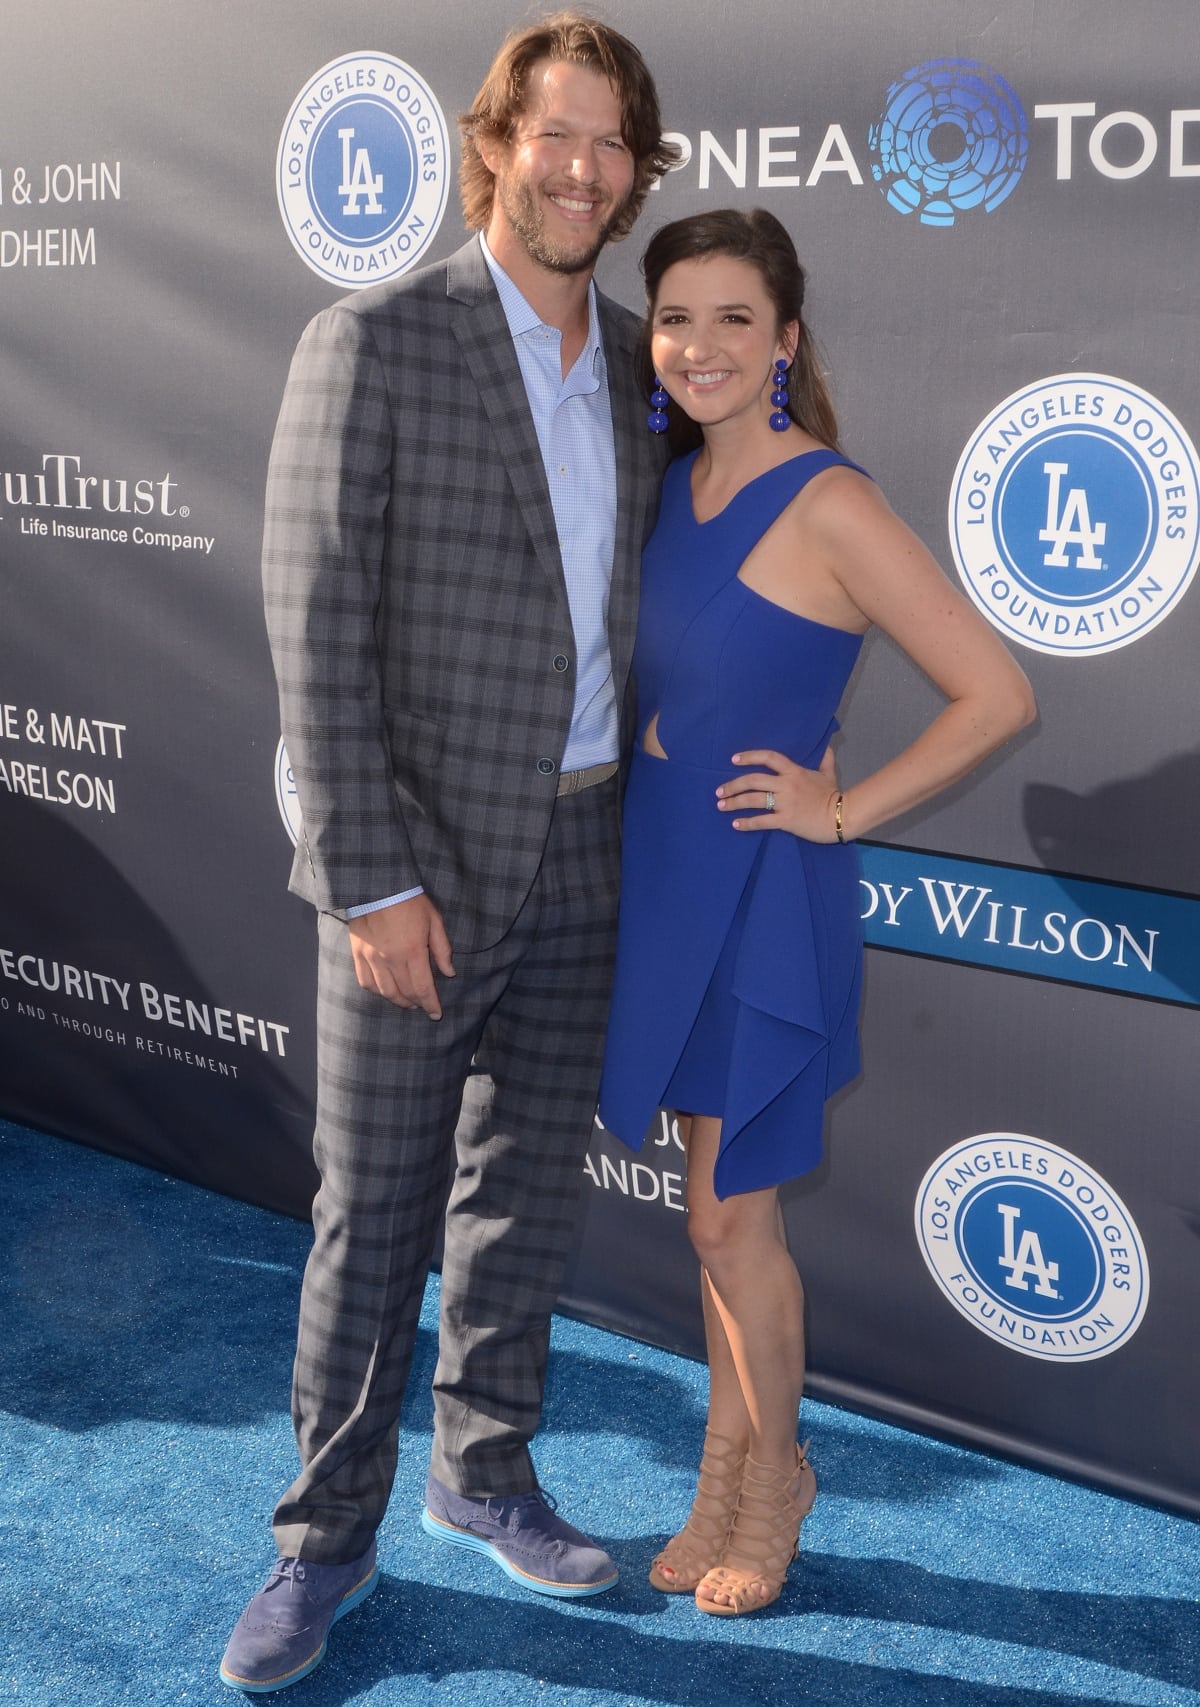 Clayton Kershaw and wife Ellen Kershaw making a date night out of The Los Angeles Dodgers Foundation’s 3rd Annual Blue Diamond Gala